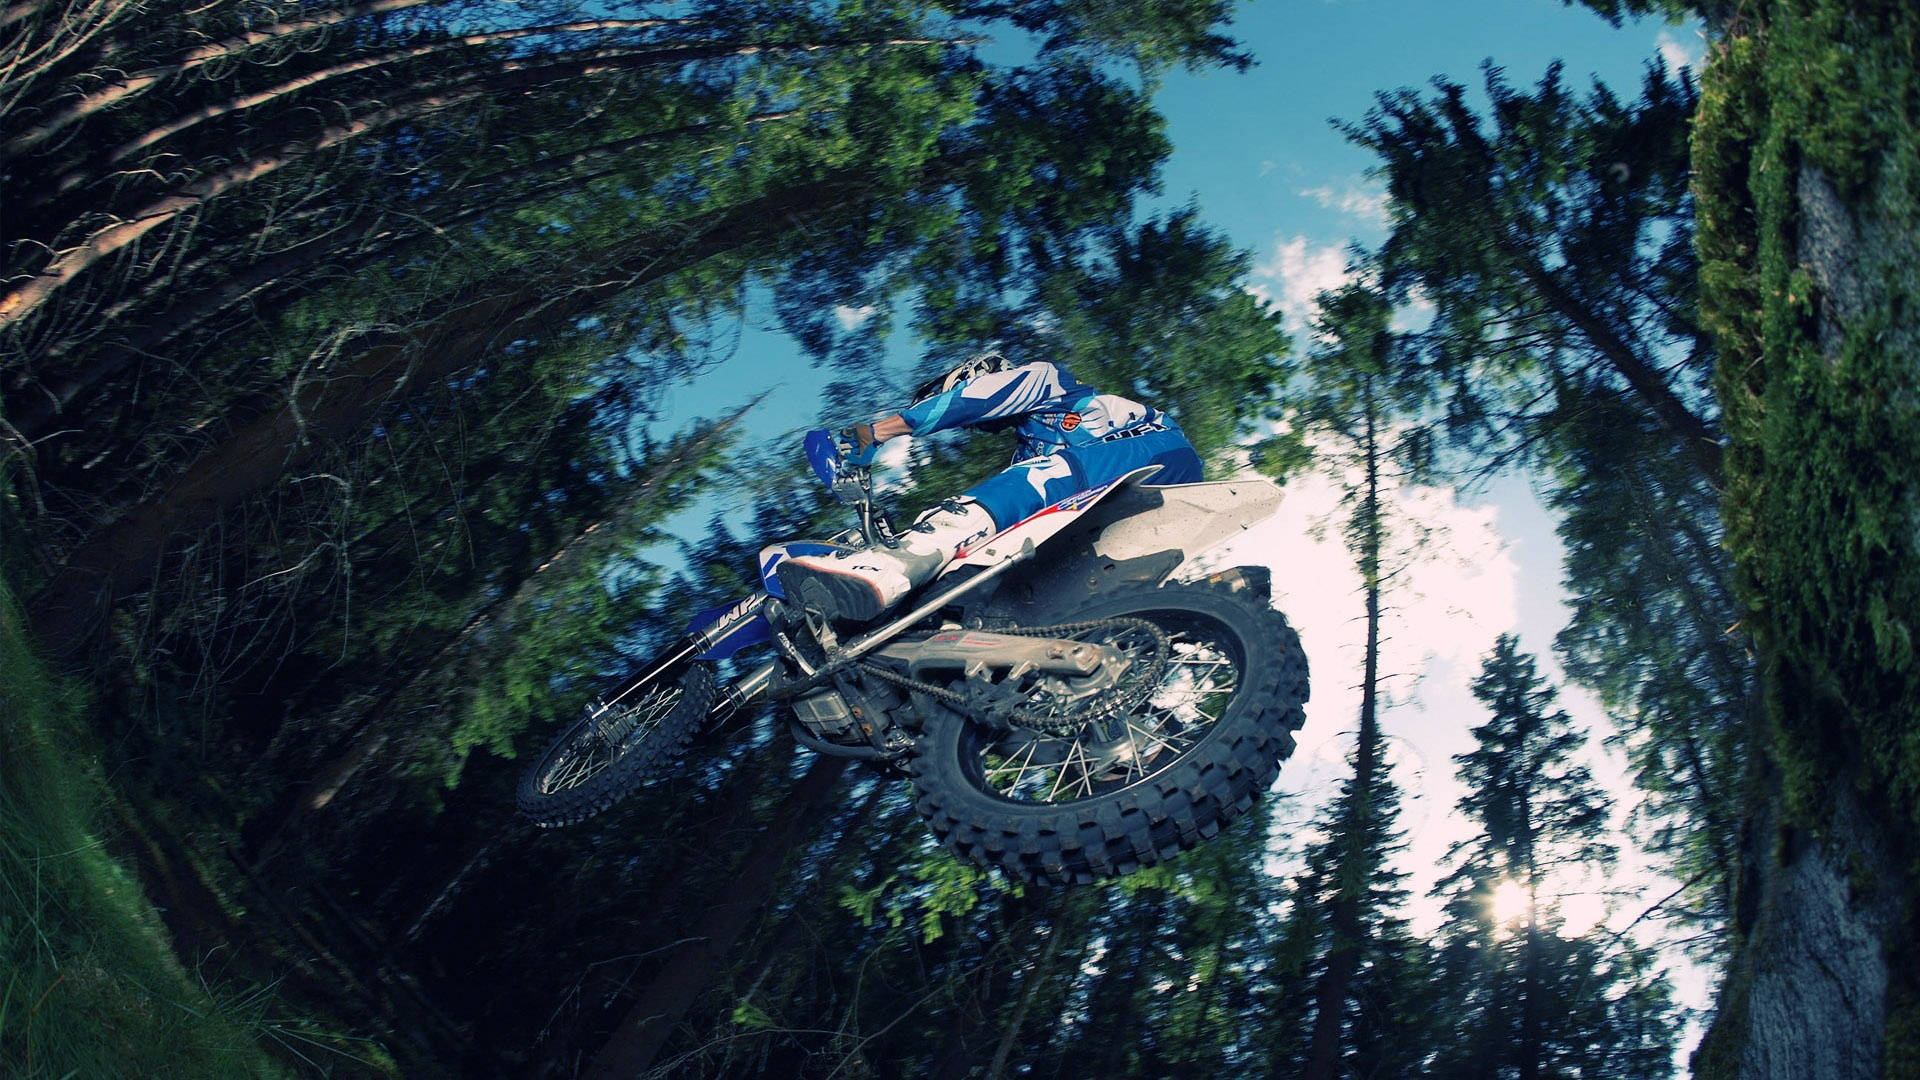 Thrilling Low Angle Shot of a High-Speed Dirt Bike Wallpaper